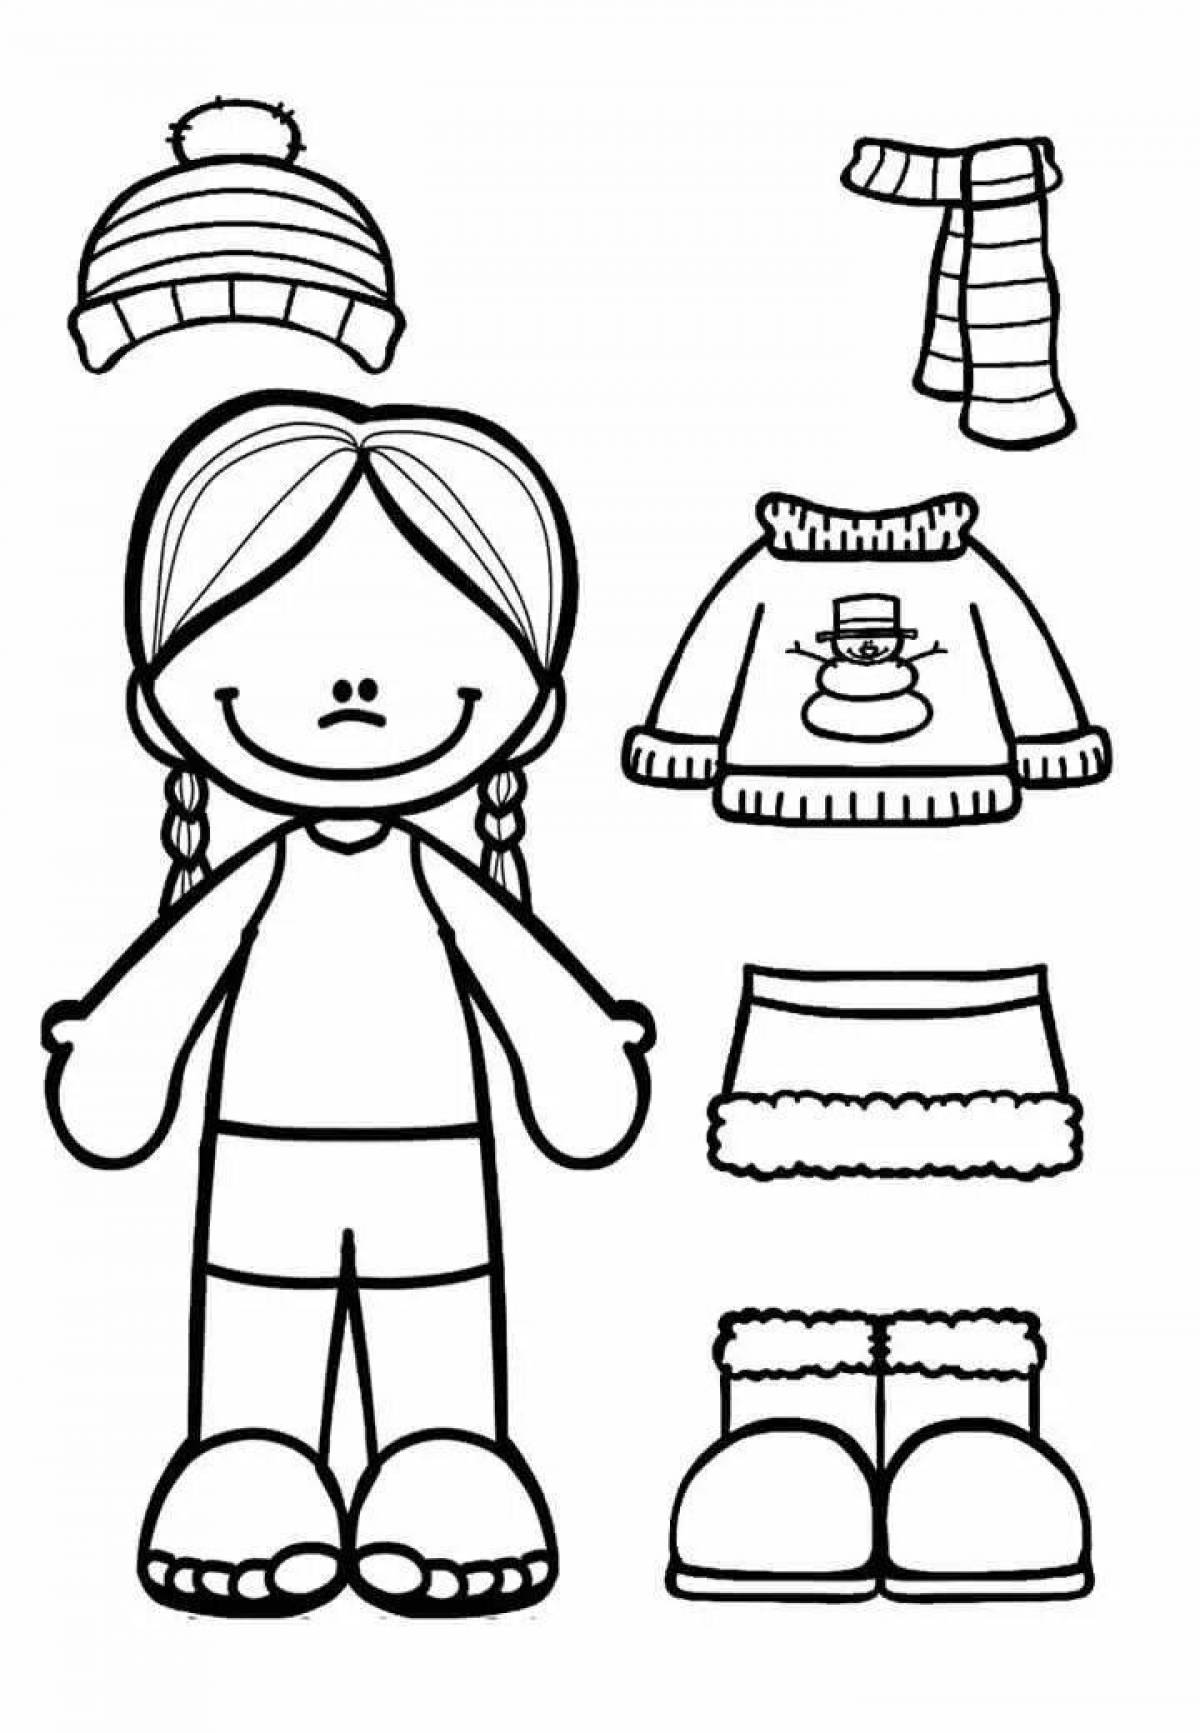 Delightful coloring doll without clothes